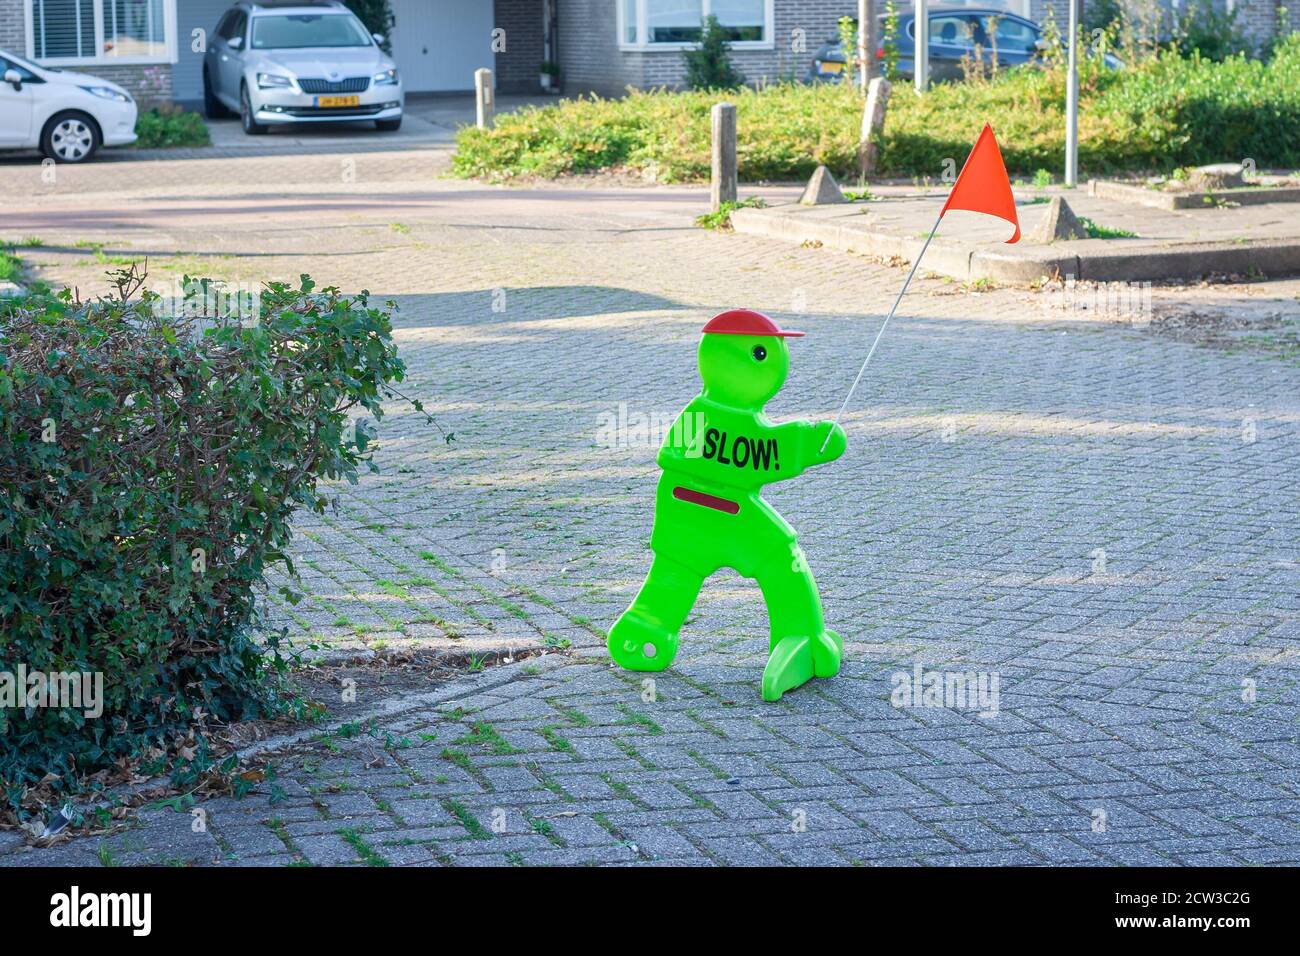 Fluorescent figure with cap and flag to warn traffic in a street for children playing and to limit speed. Stock Photo